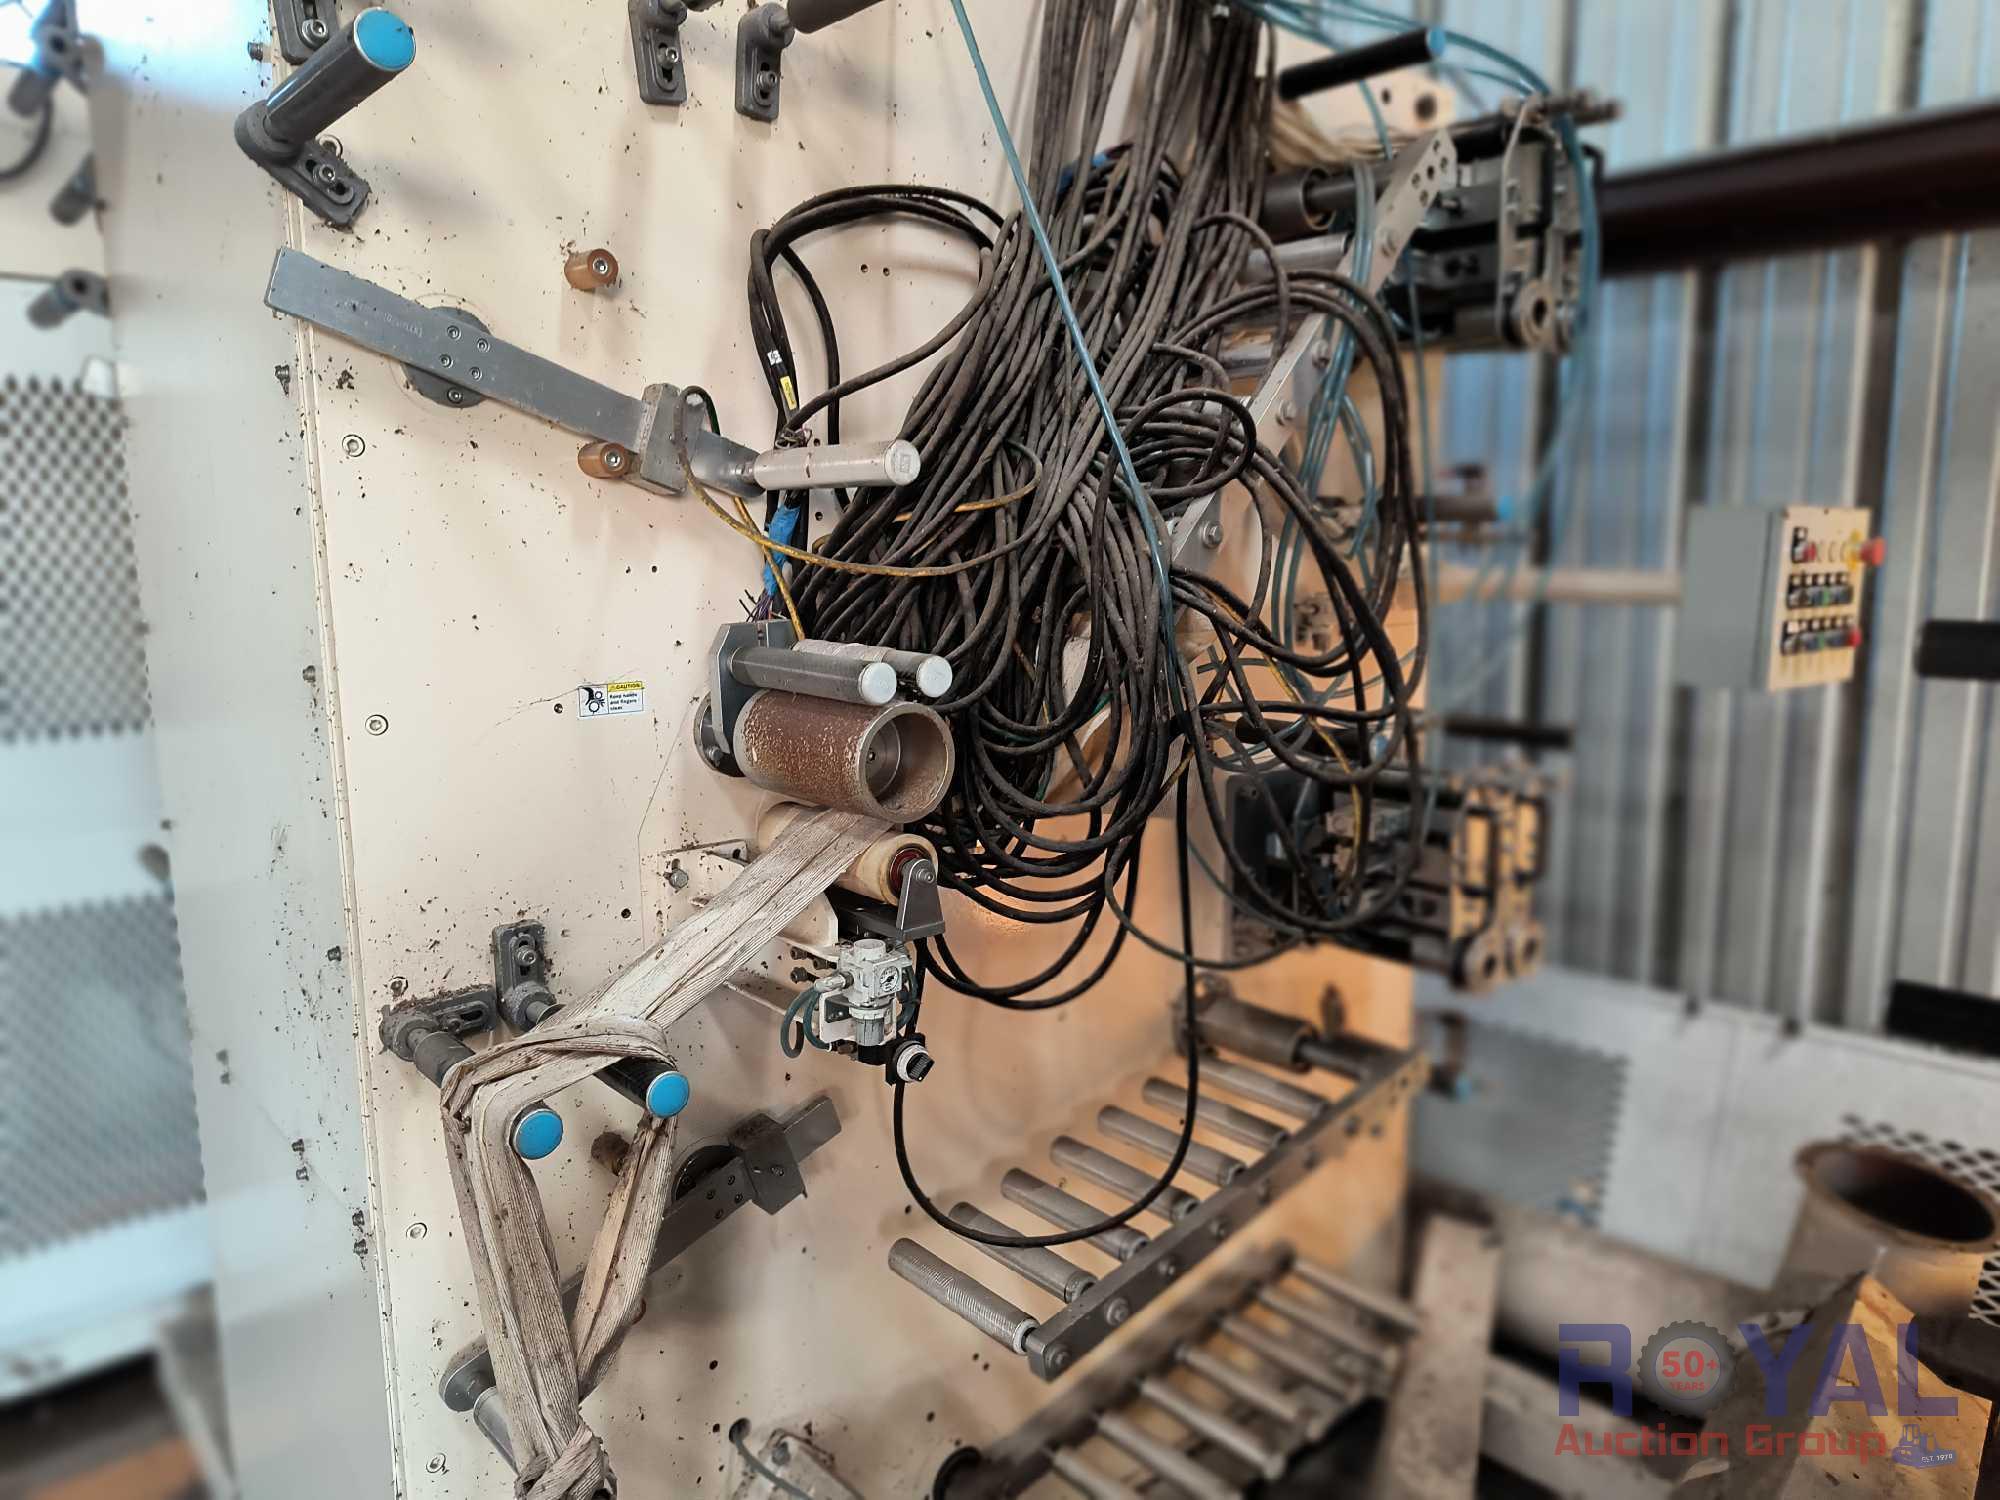 Industrial Automated Assembly Packing Machine